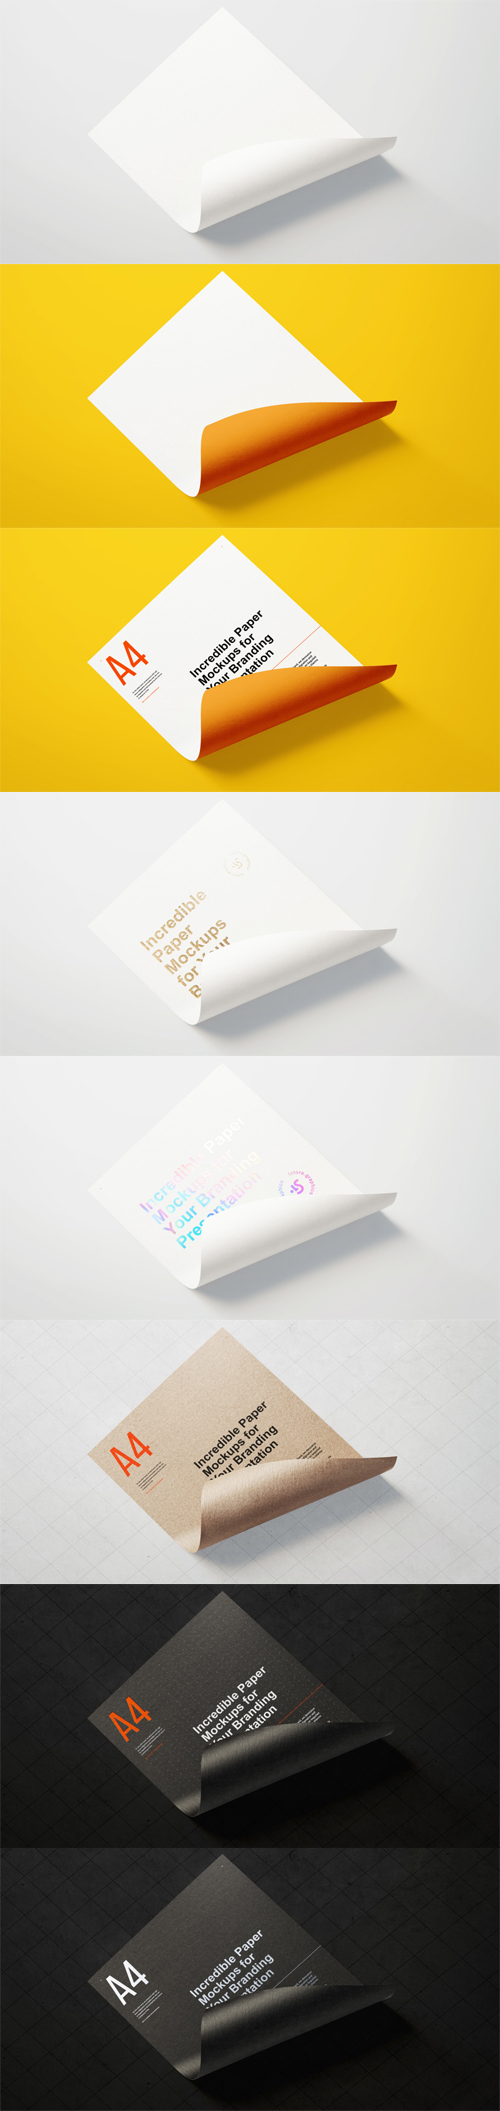 Awesome Paper Branding PSD Mockup